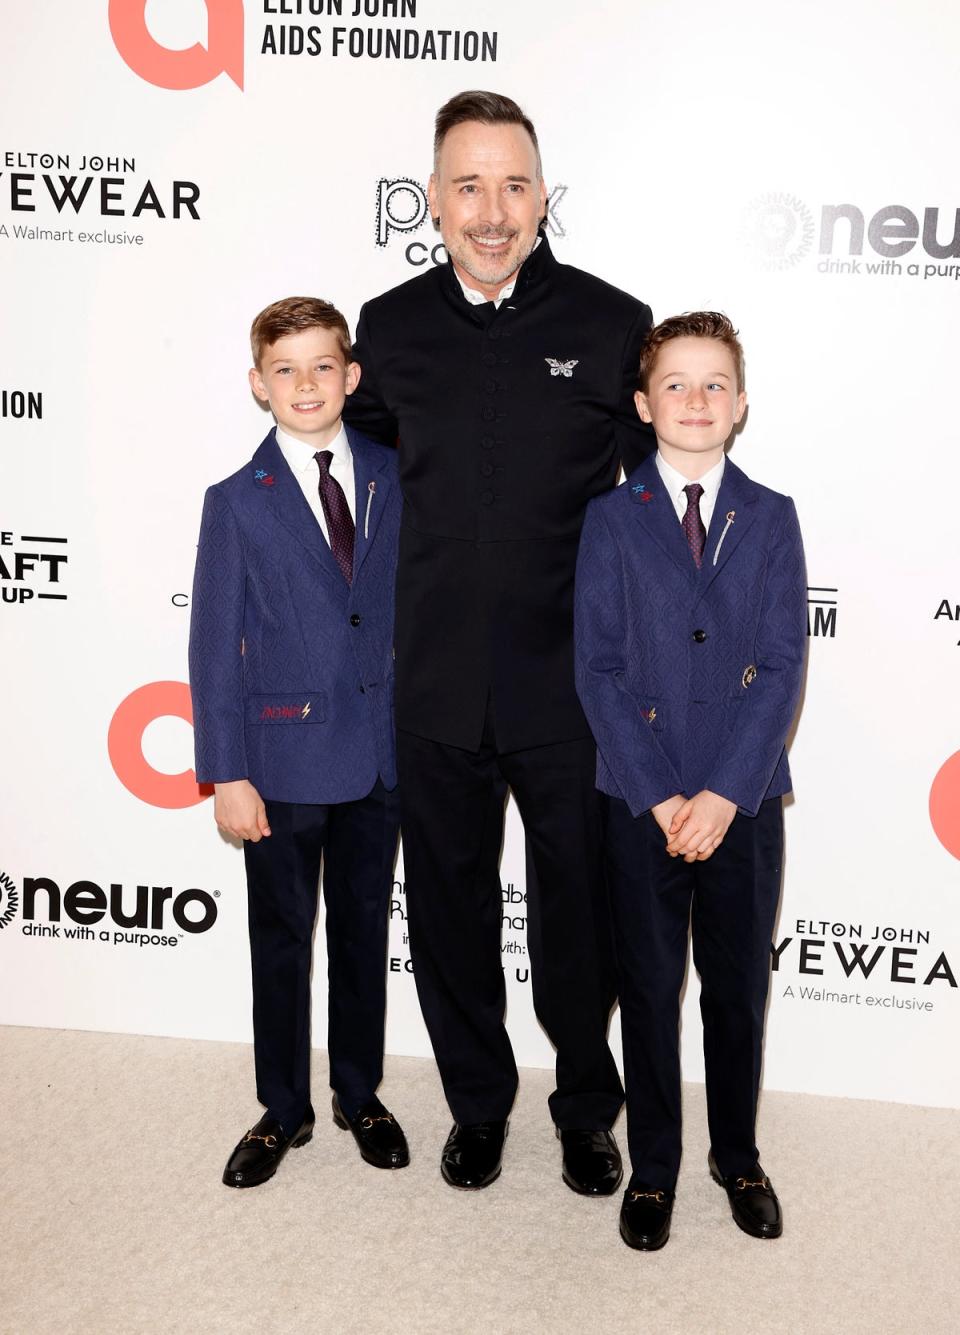 Furnish with his and Elton’s sons Elijah (left) and Zachary in 2022 (AFP via Getty Images)